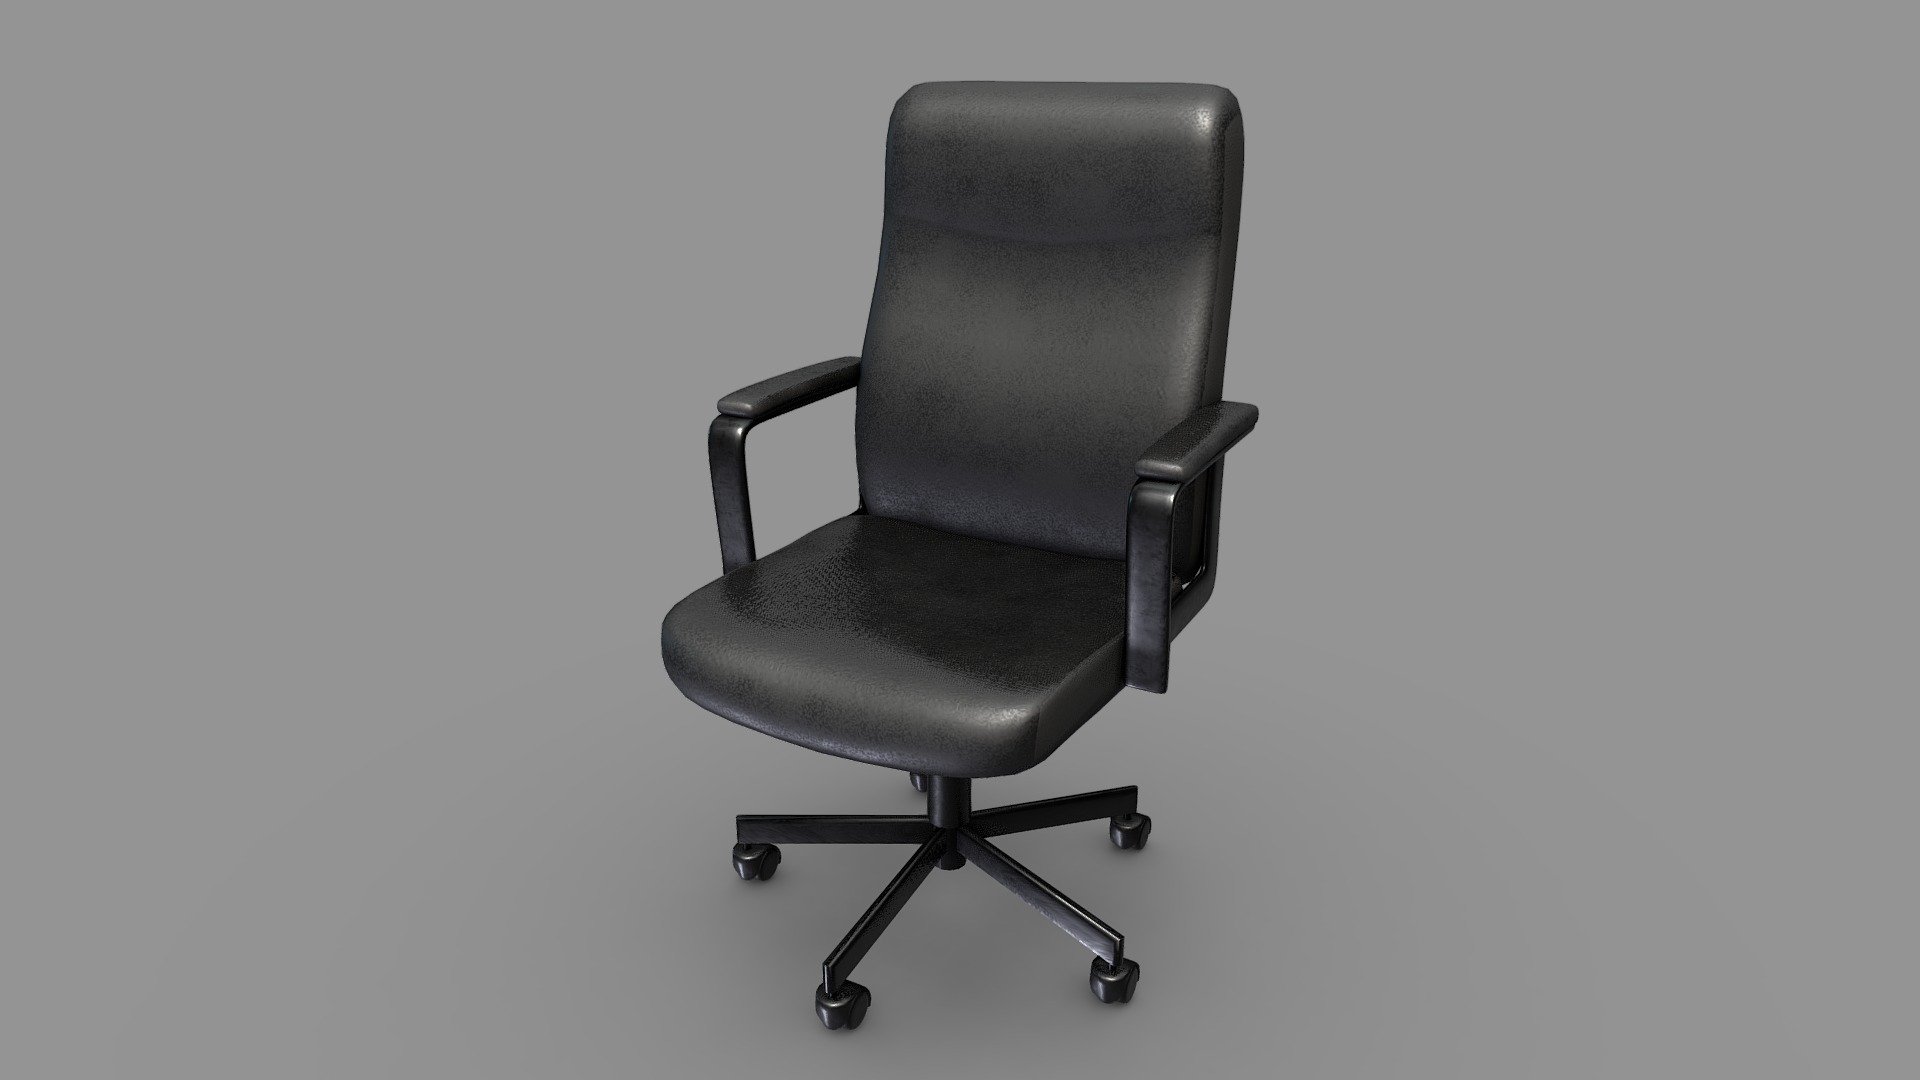 Generic, unbranded office chair. Suitable for your next furniture / architecture / interior design project.

Also available as part of our 15 item asset pack: https://sketchfab.com/models/0fc4efd9f5f44faa98eece686d8cb890 - Office Chair - Buy Royalty Free 3D model by Virtual Studio (@virtualstudio) 3d model